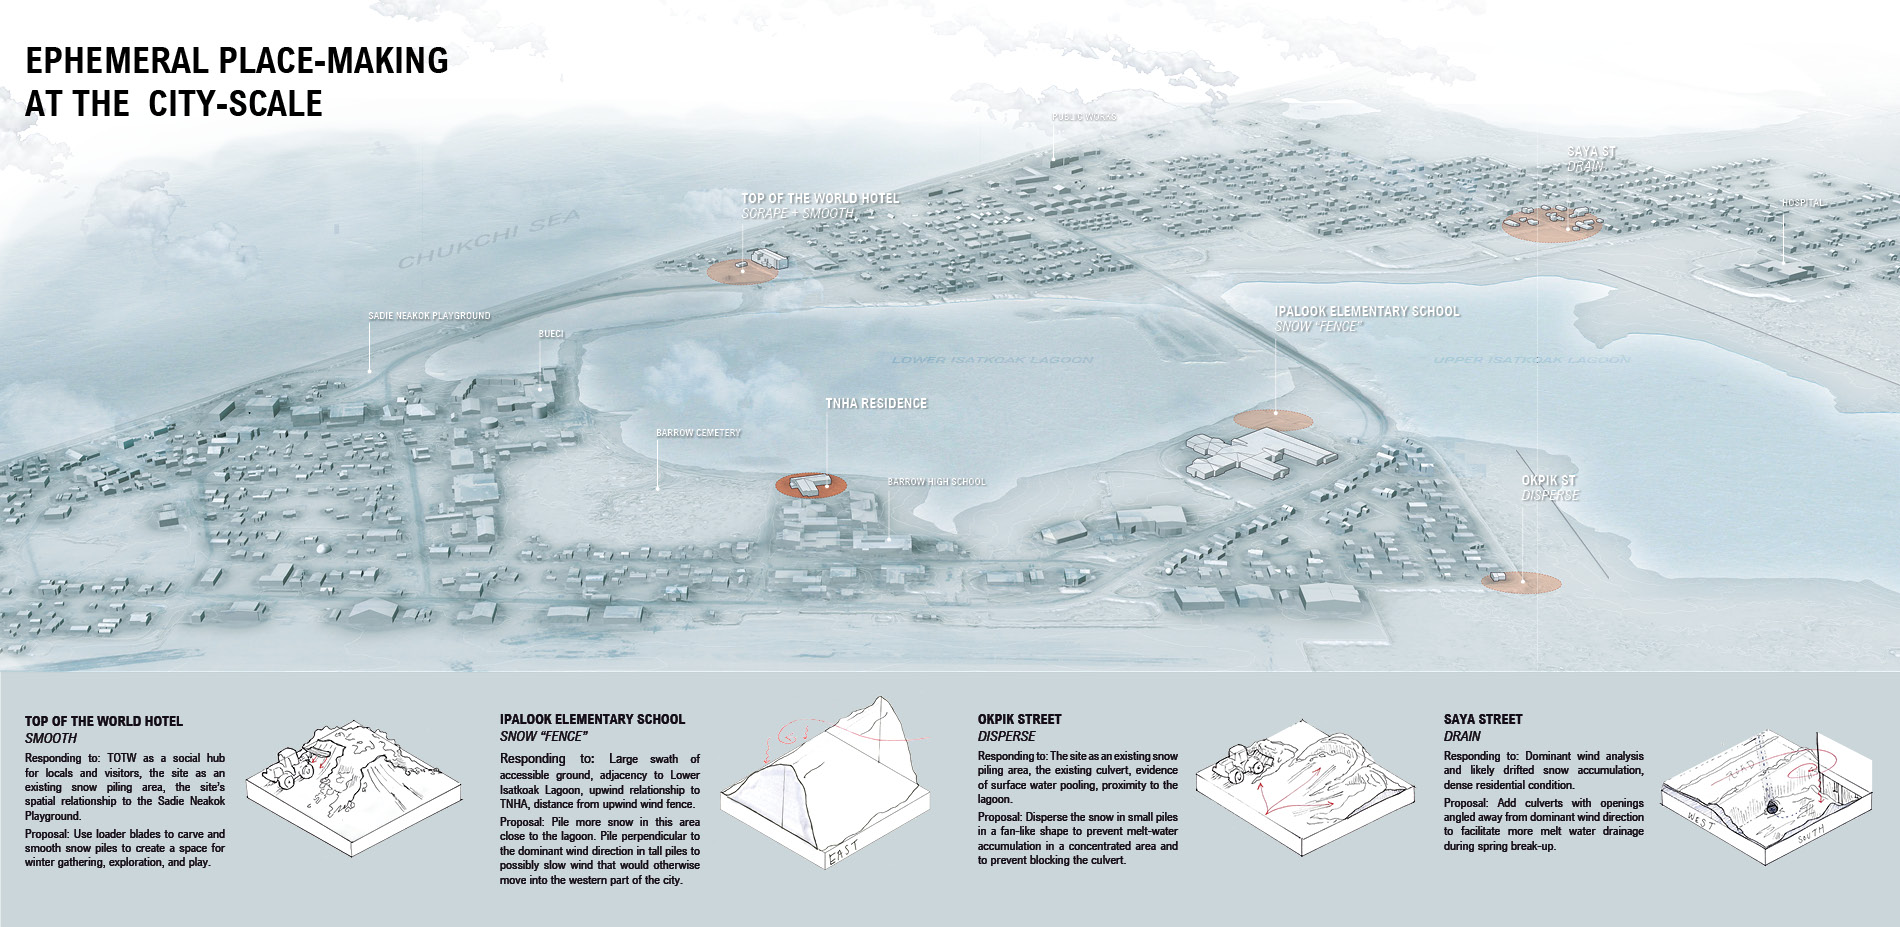 Ephemeral Place-Making at the City-Scale: Preserving permafrost and creating experiences with snow and melt